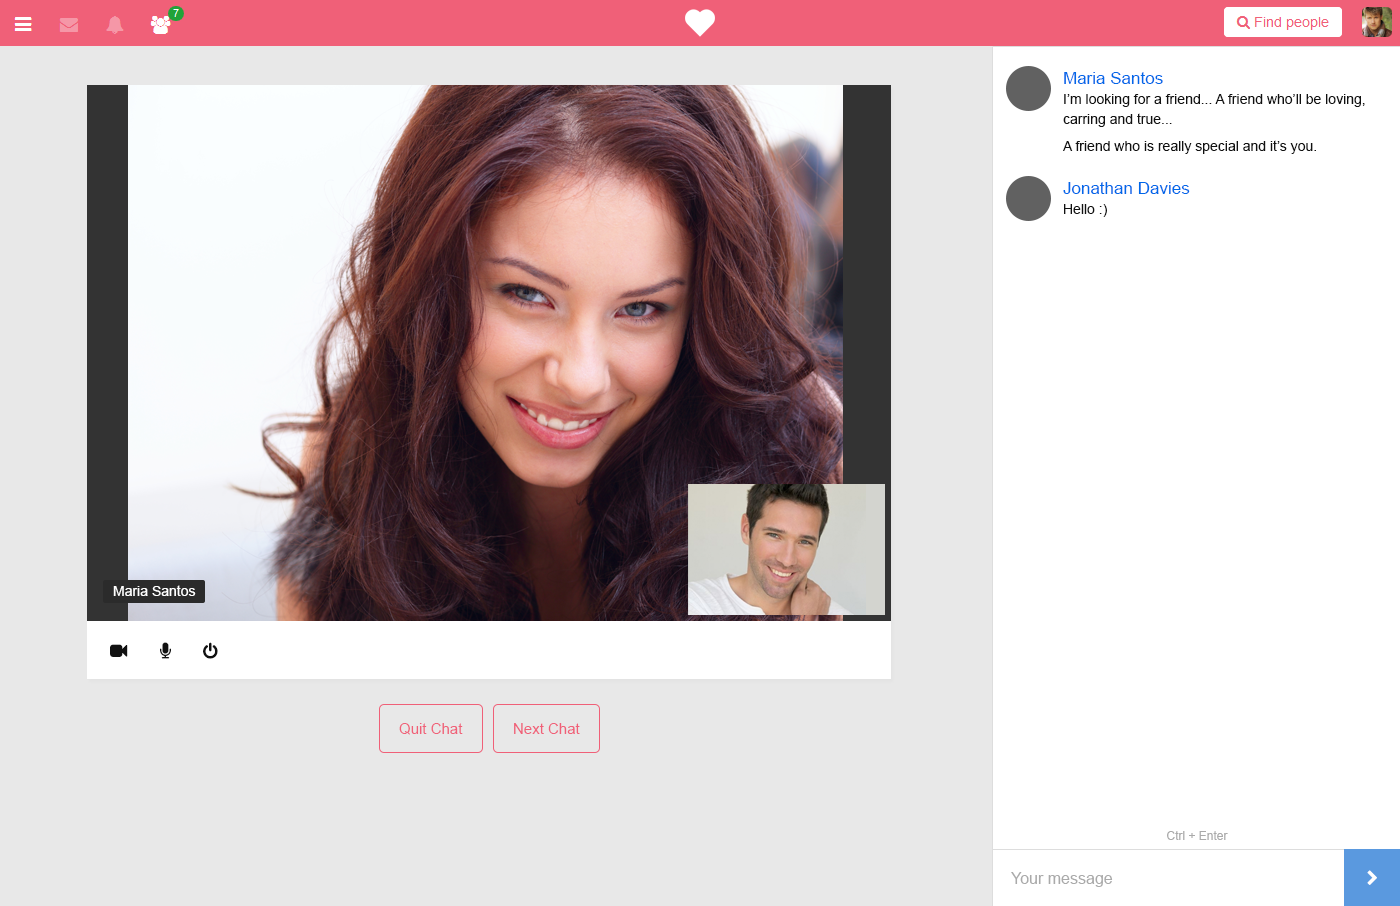 Video chat on your server - No sharing your revenue with any video chat providers